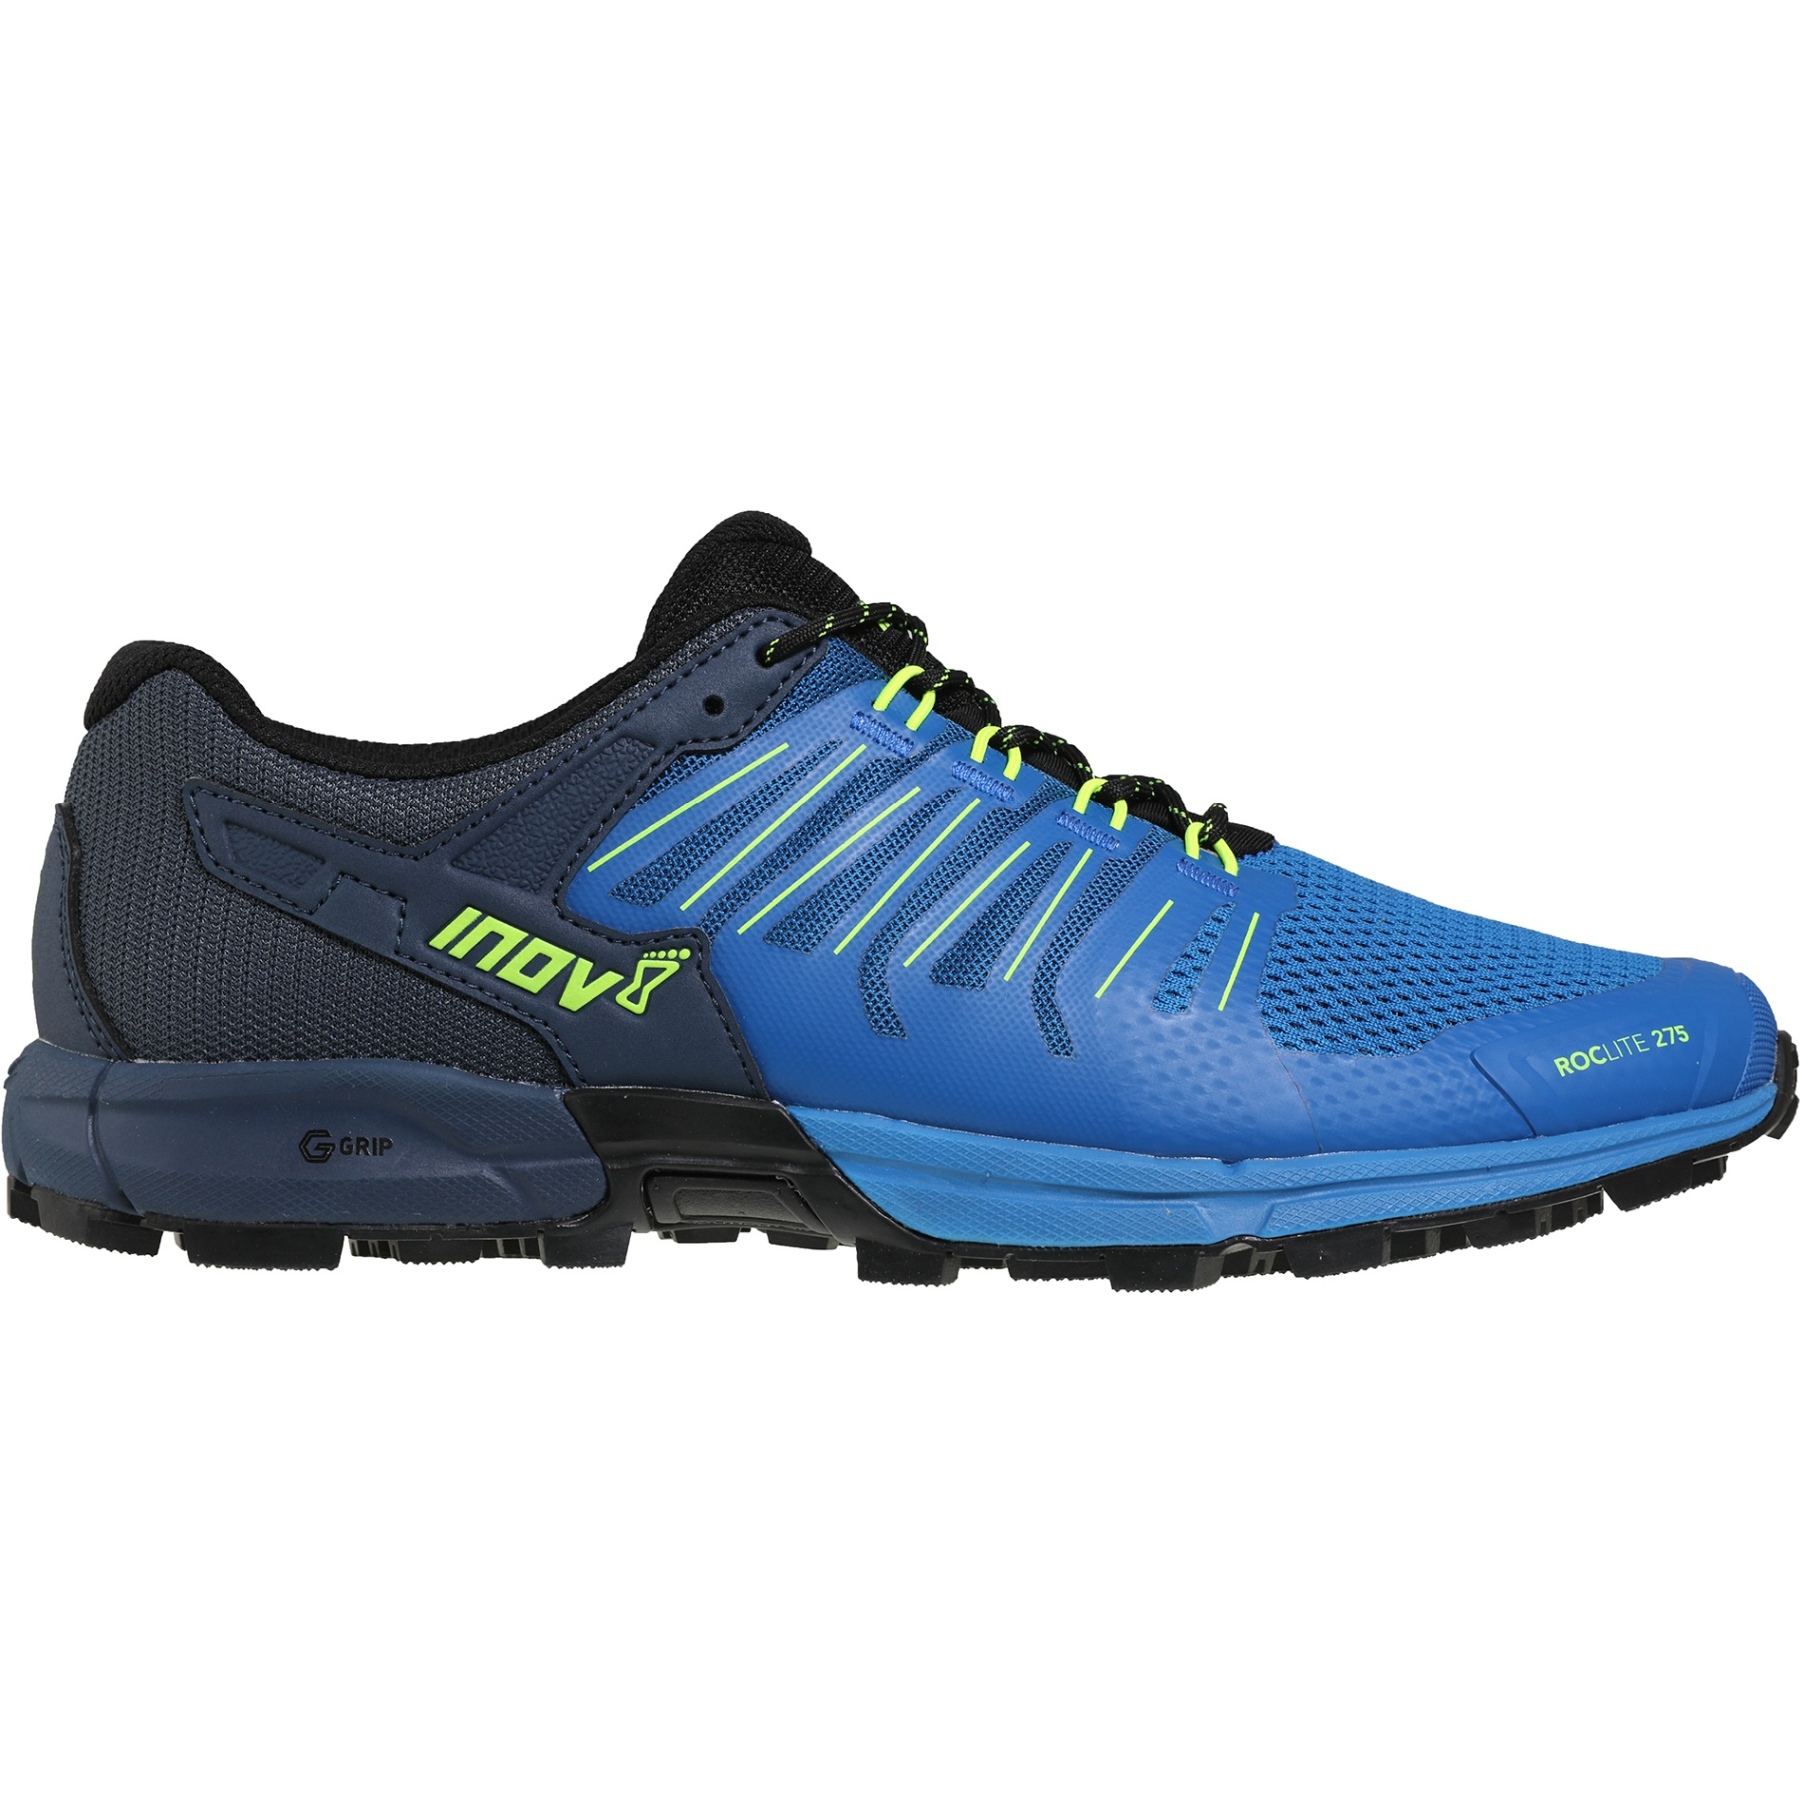 Picture of Inov-8 Roclite G 275 Running Shoes - blue/navy/yellow